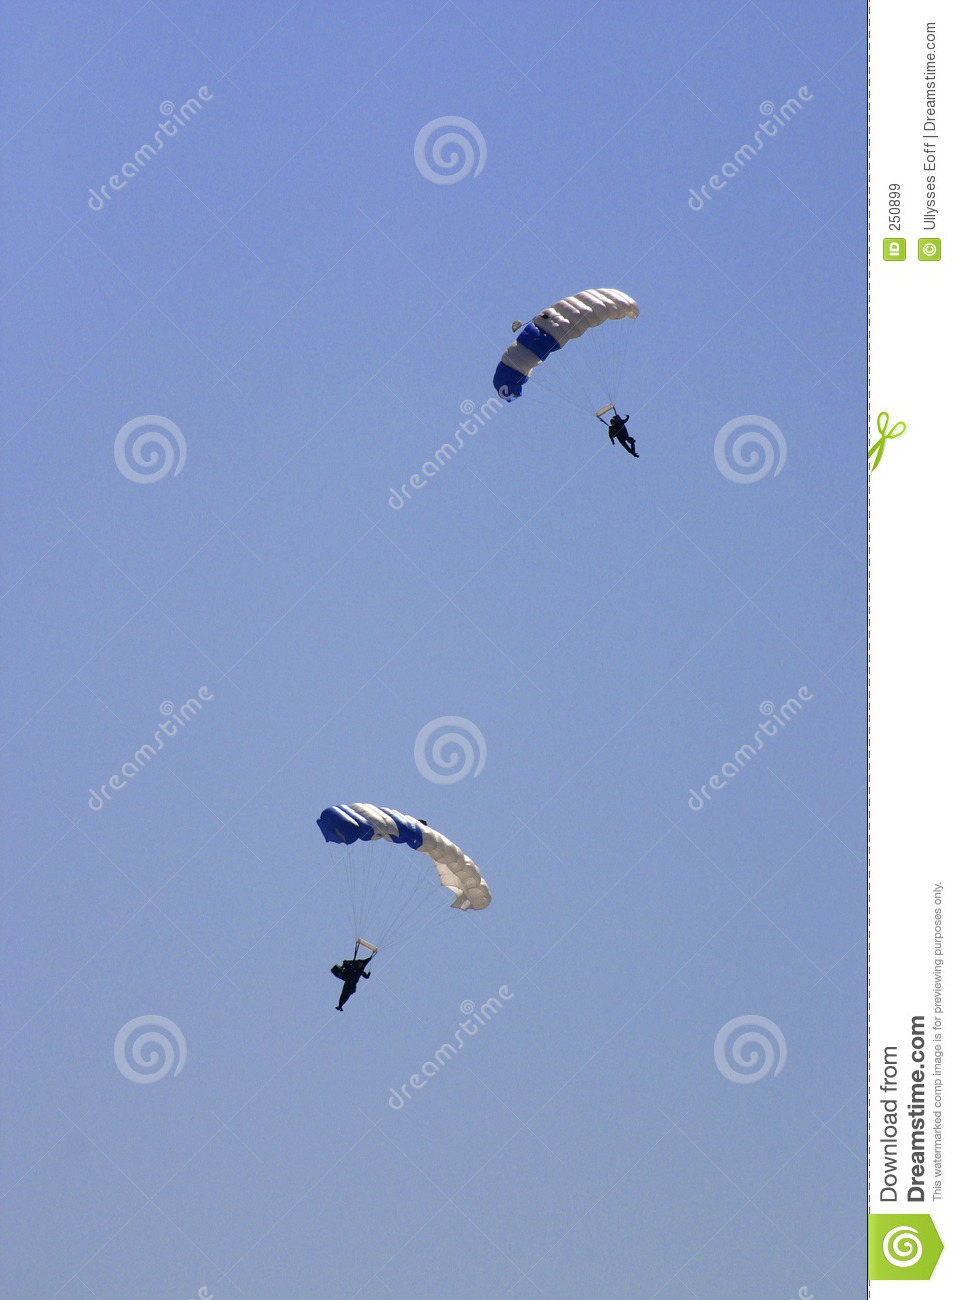 Royalty Free Stock Images  United States Air Force Paratroopers